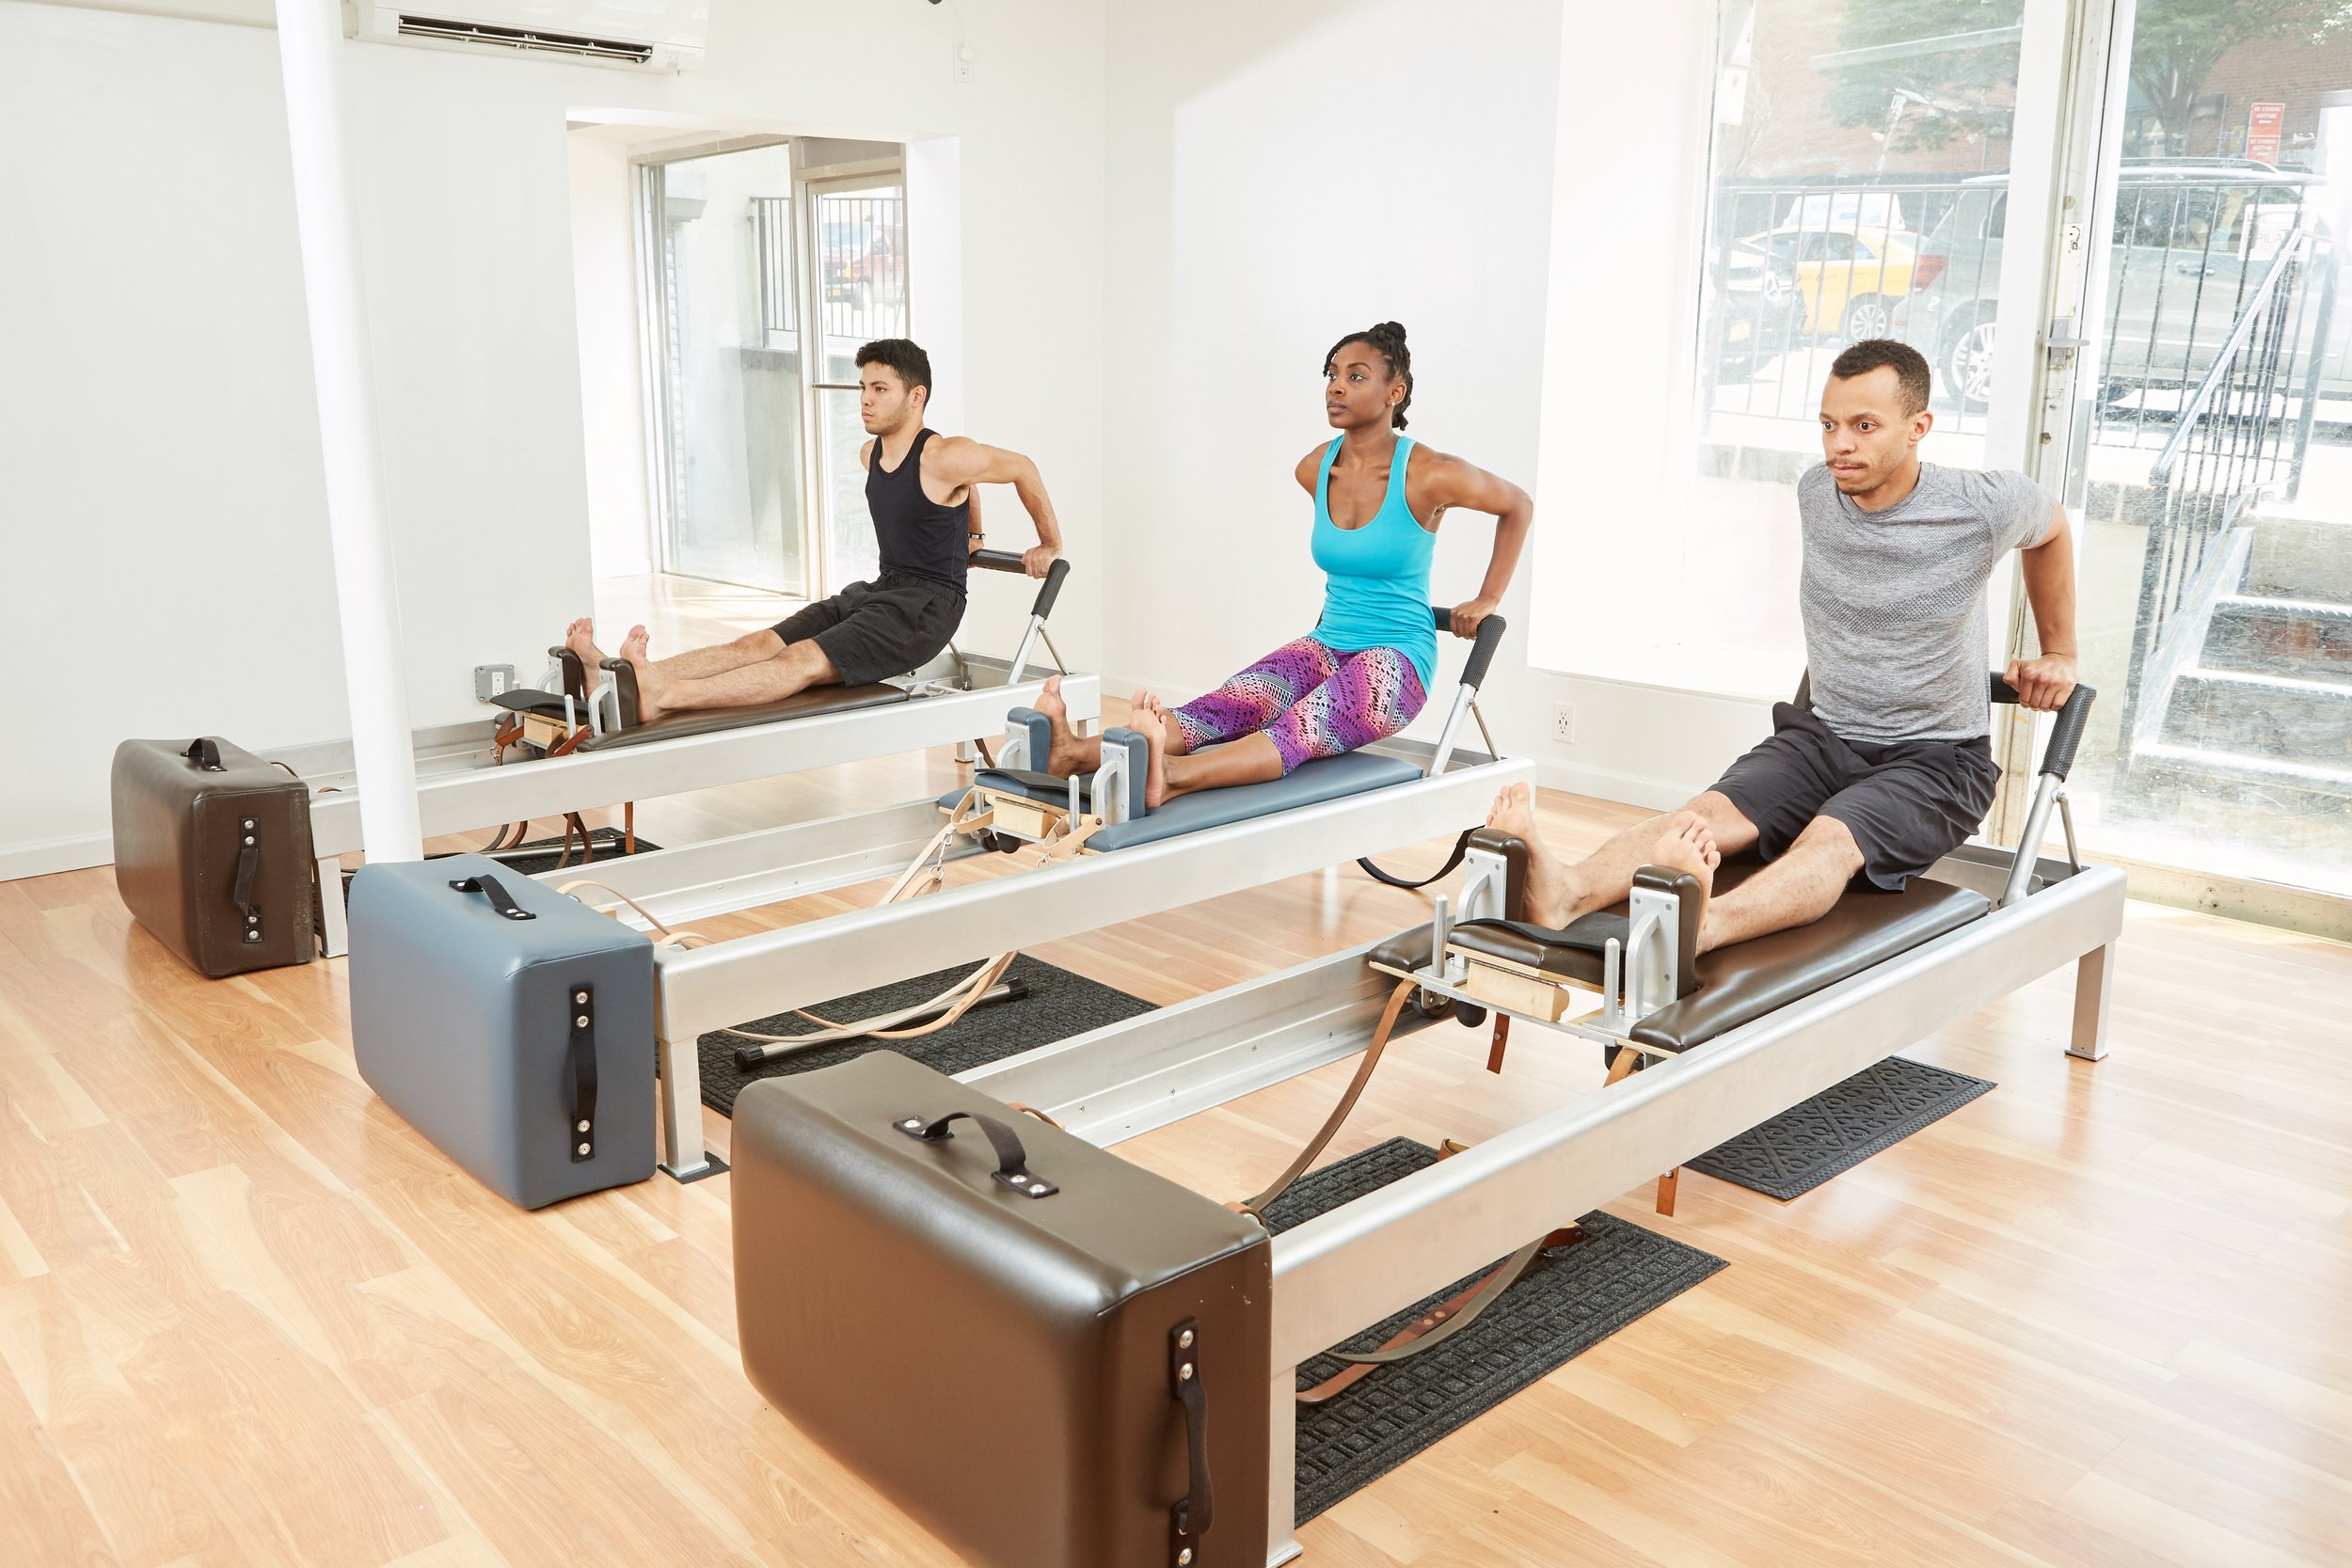 Considering a Group Pilates Class?